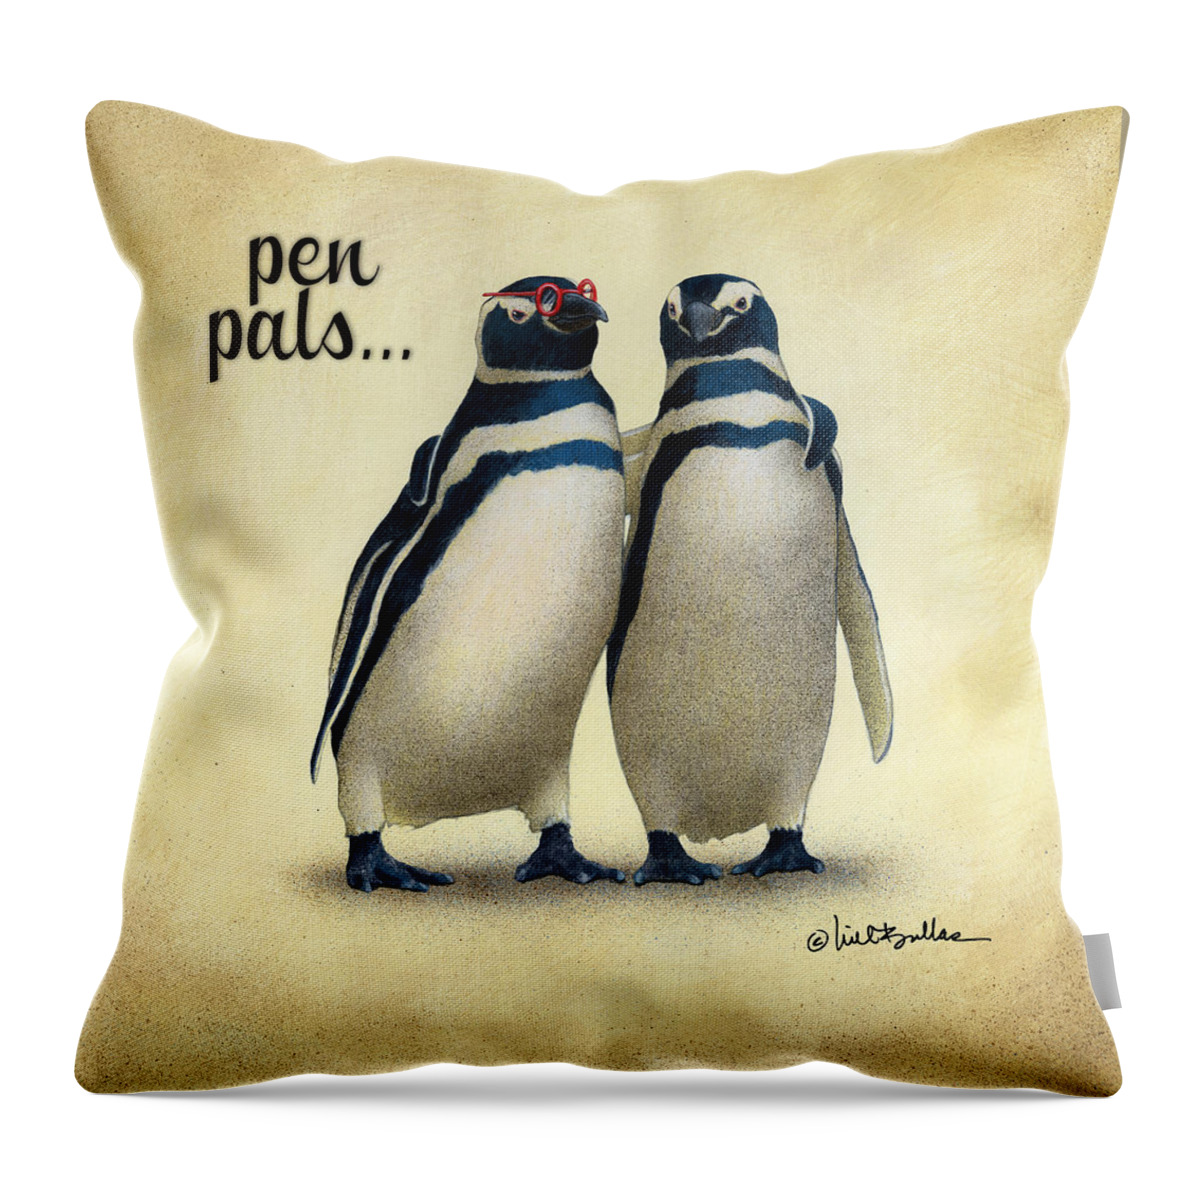 Will Bullas Throw Pillow featuring the painting Pen Pals... #3 by Will Bullas